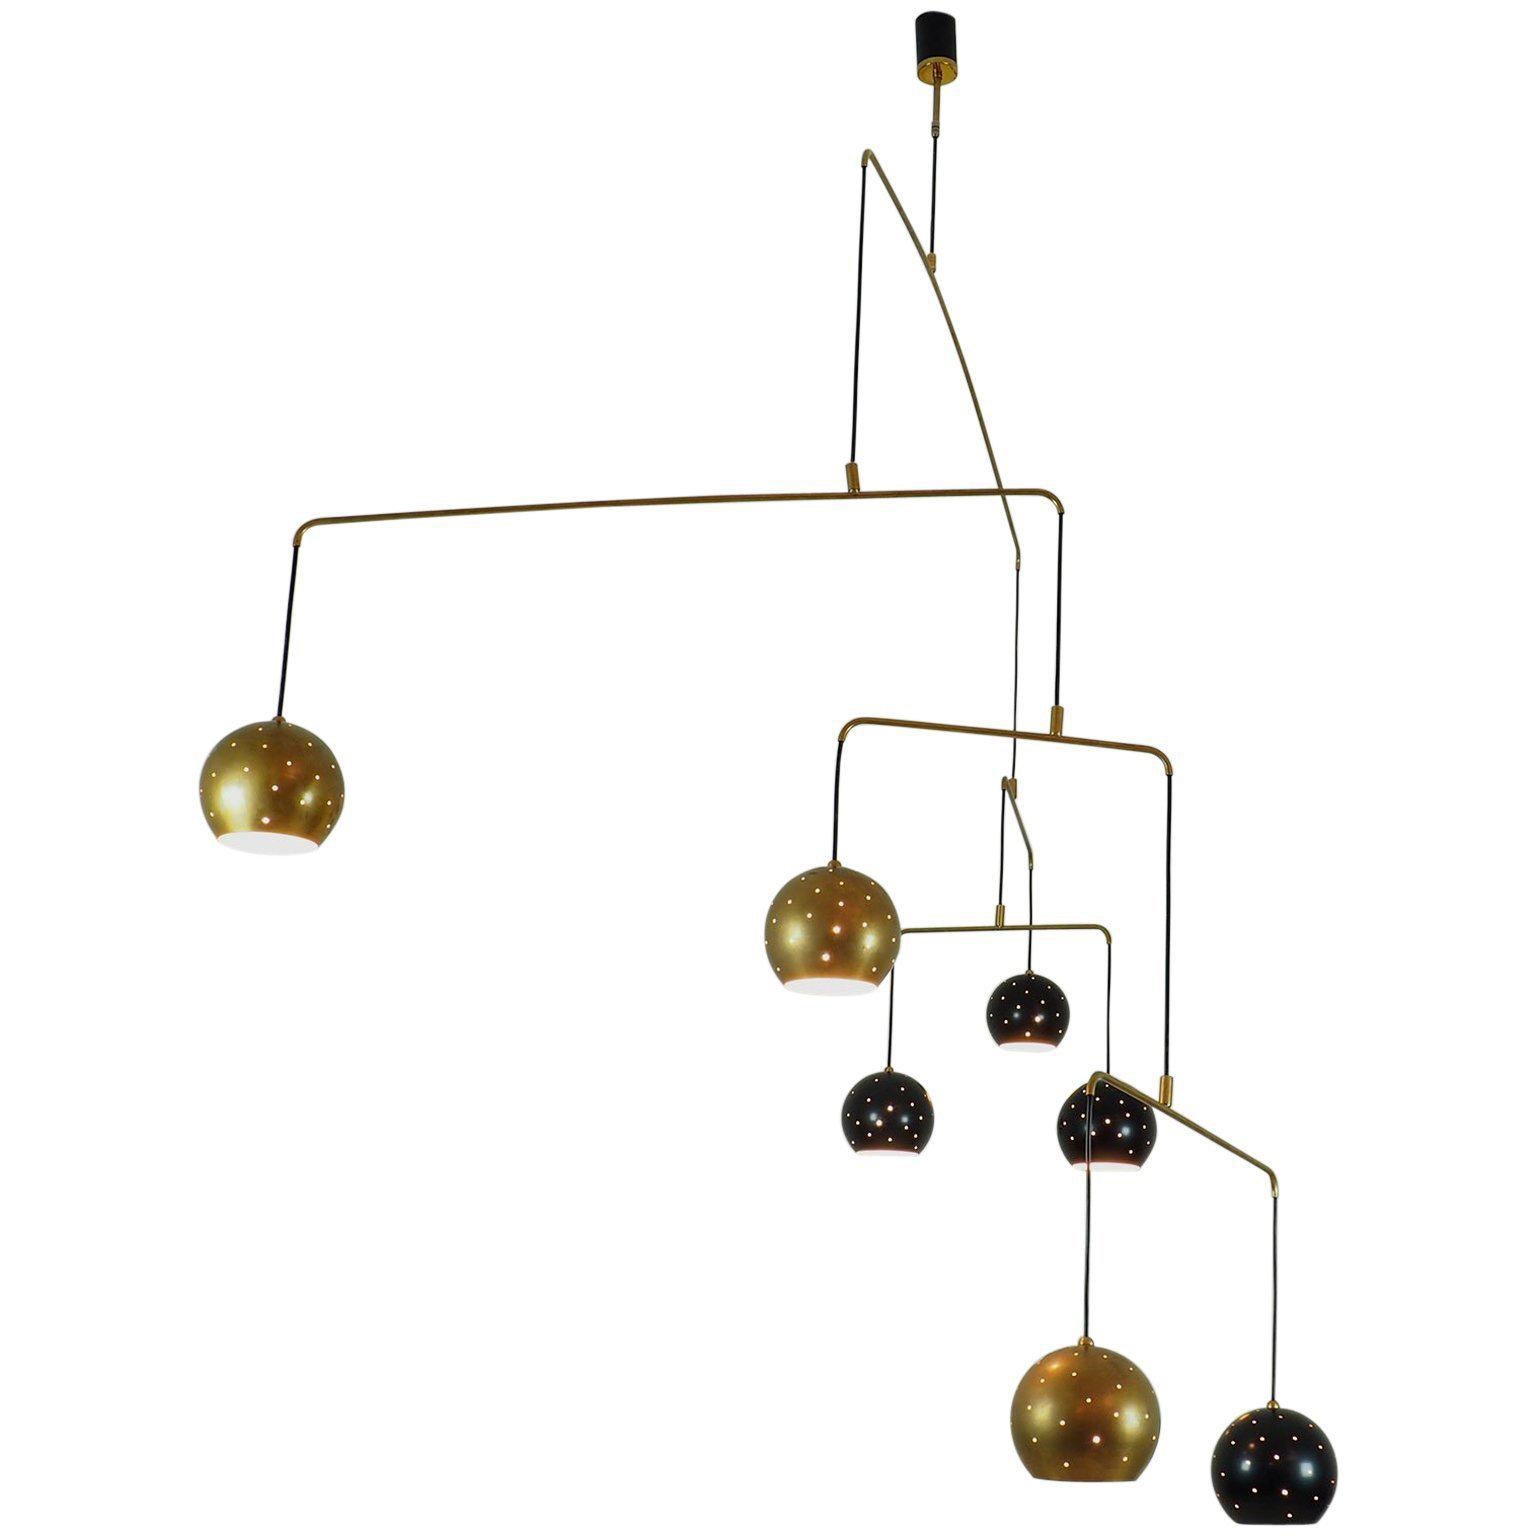 Original Italian brass mobile chandelier manufactured in a very very7 small handcraft production in Milano, 20th century
Large, magic and poetical mobile chandelier with brass and black suspending spheres, it can moves with the flow of air.
Wholly